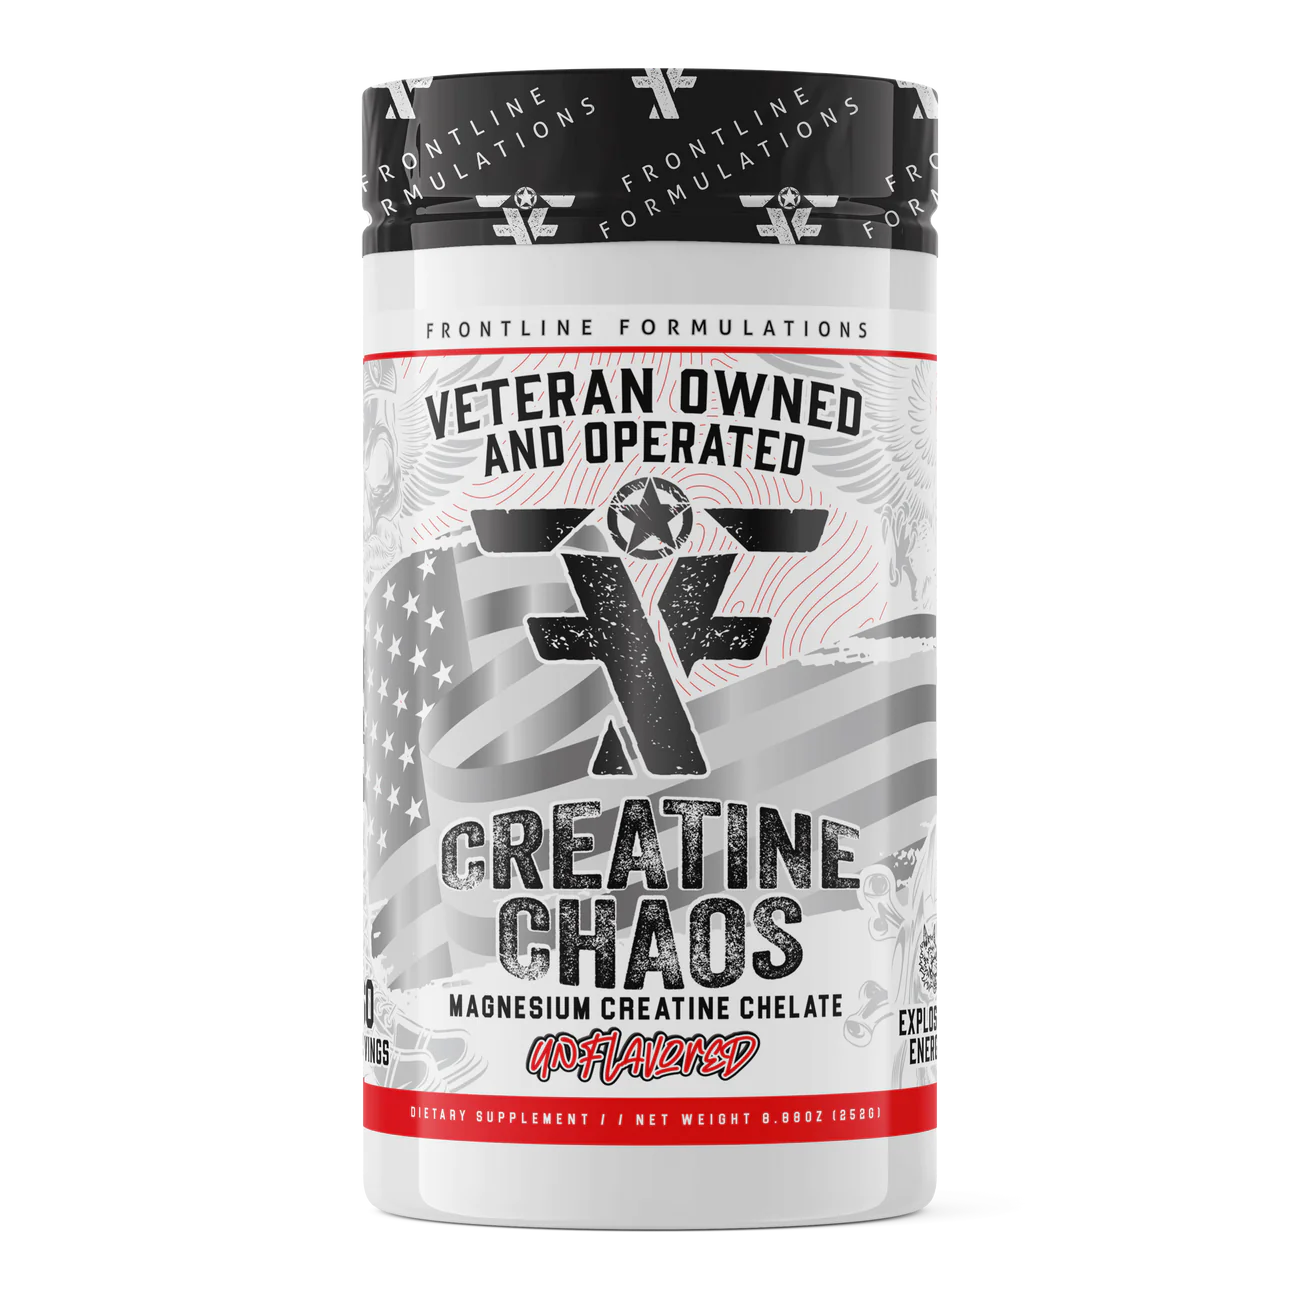 Operation Delirium Pump Creatine Chaos Stack Operation Delirium Introducing Operation Delirium, the cutting-edge preworkout designed for warriors seeking an unparalleled boost in performance and focus. This military-grade experimental formula combines the